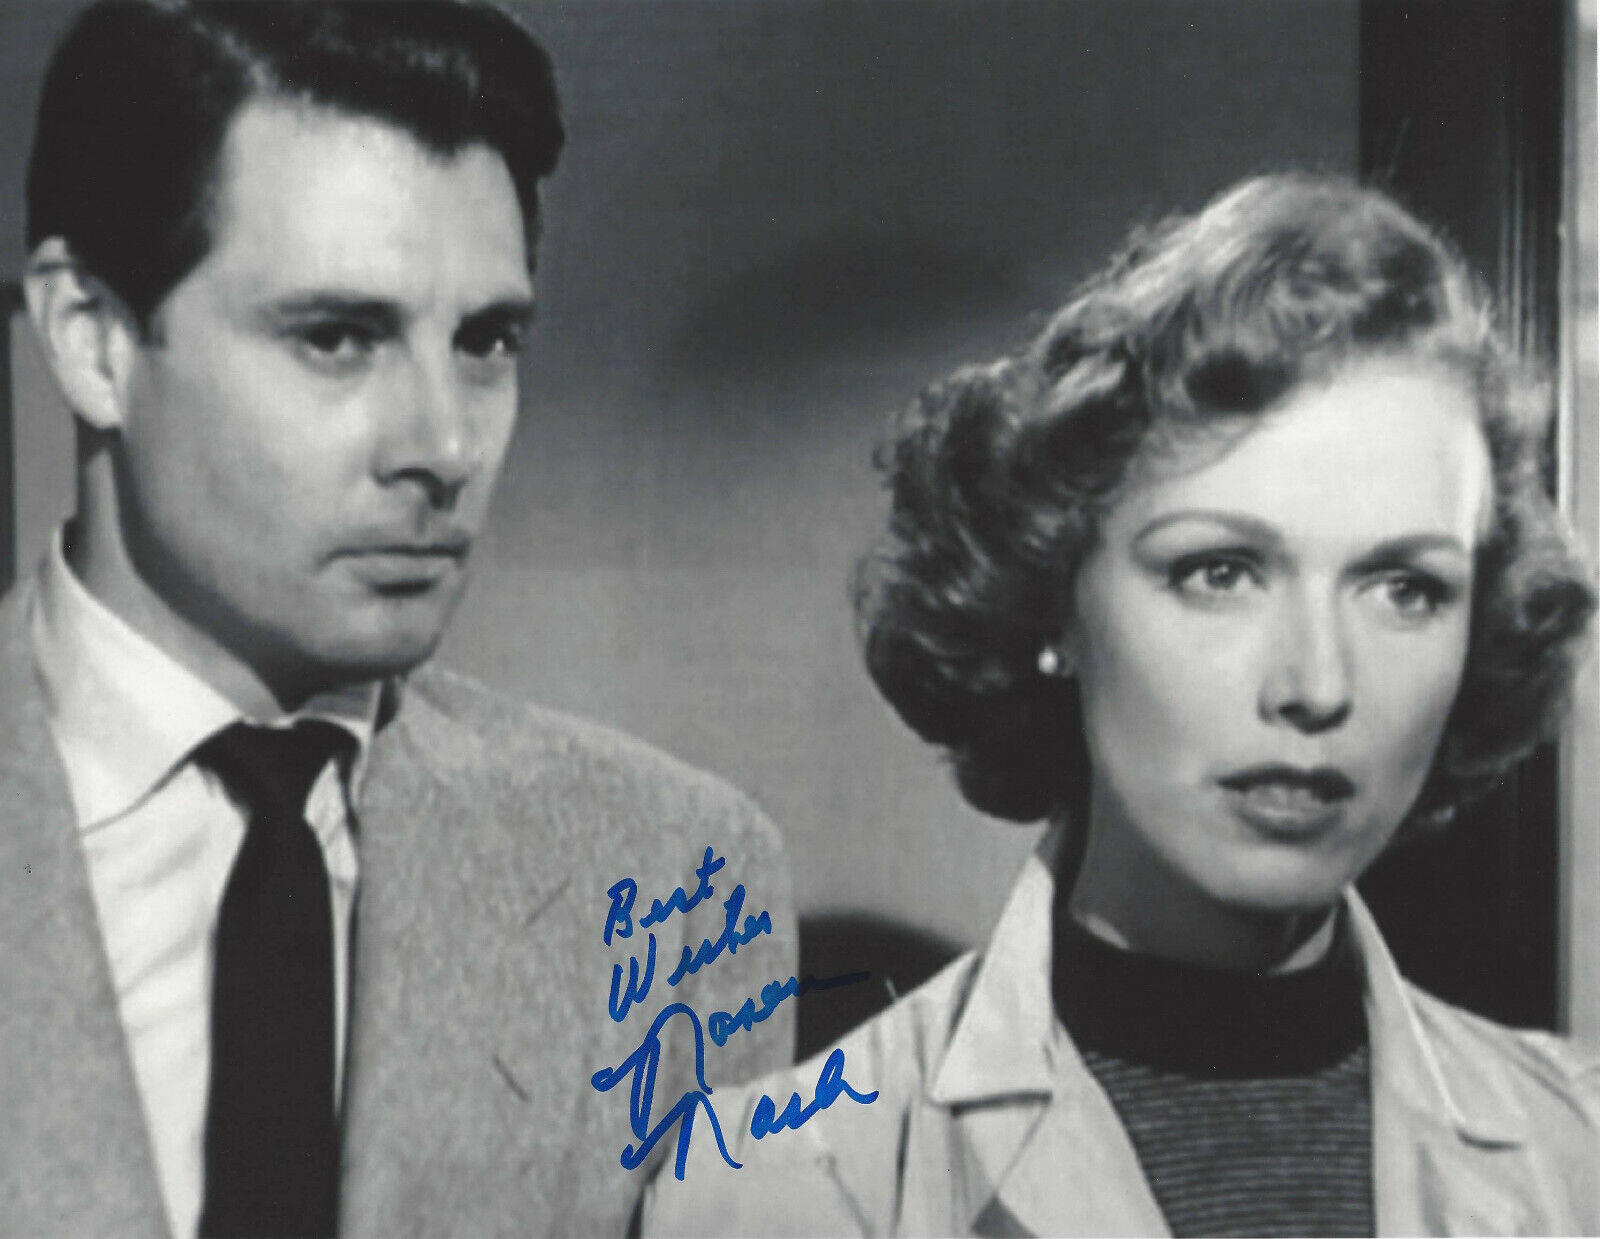 NOREEN NASH SIGNED AUTHENTIC PHANTOM FROM SPACE 8X10 Photo Poster painting B w/COA ACTRESS GIANT